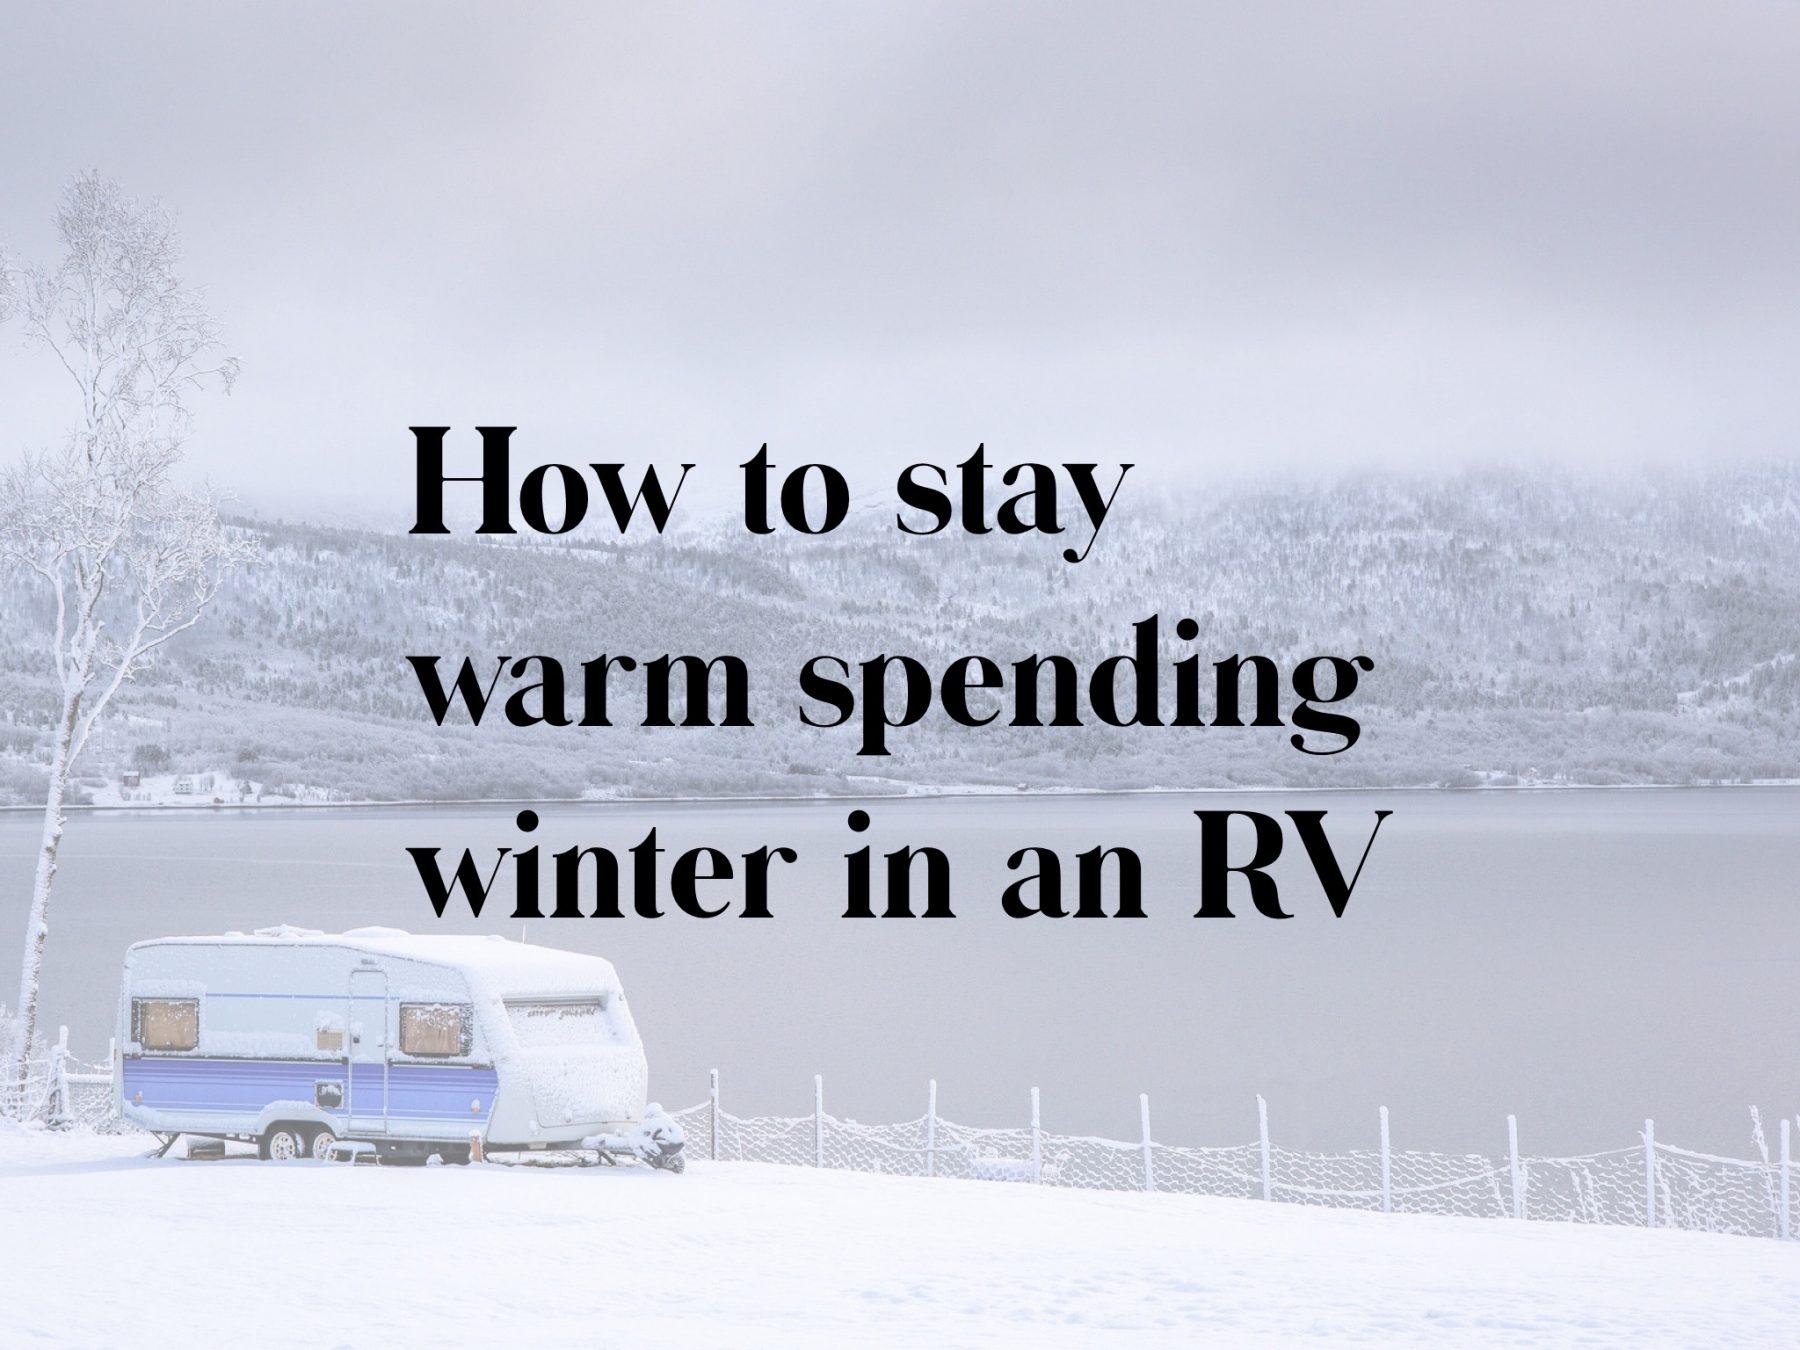 How to stay warm in winter in an RV